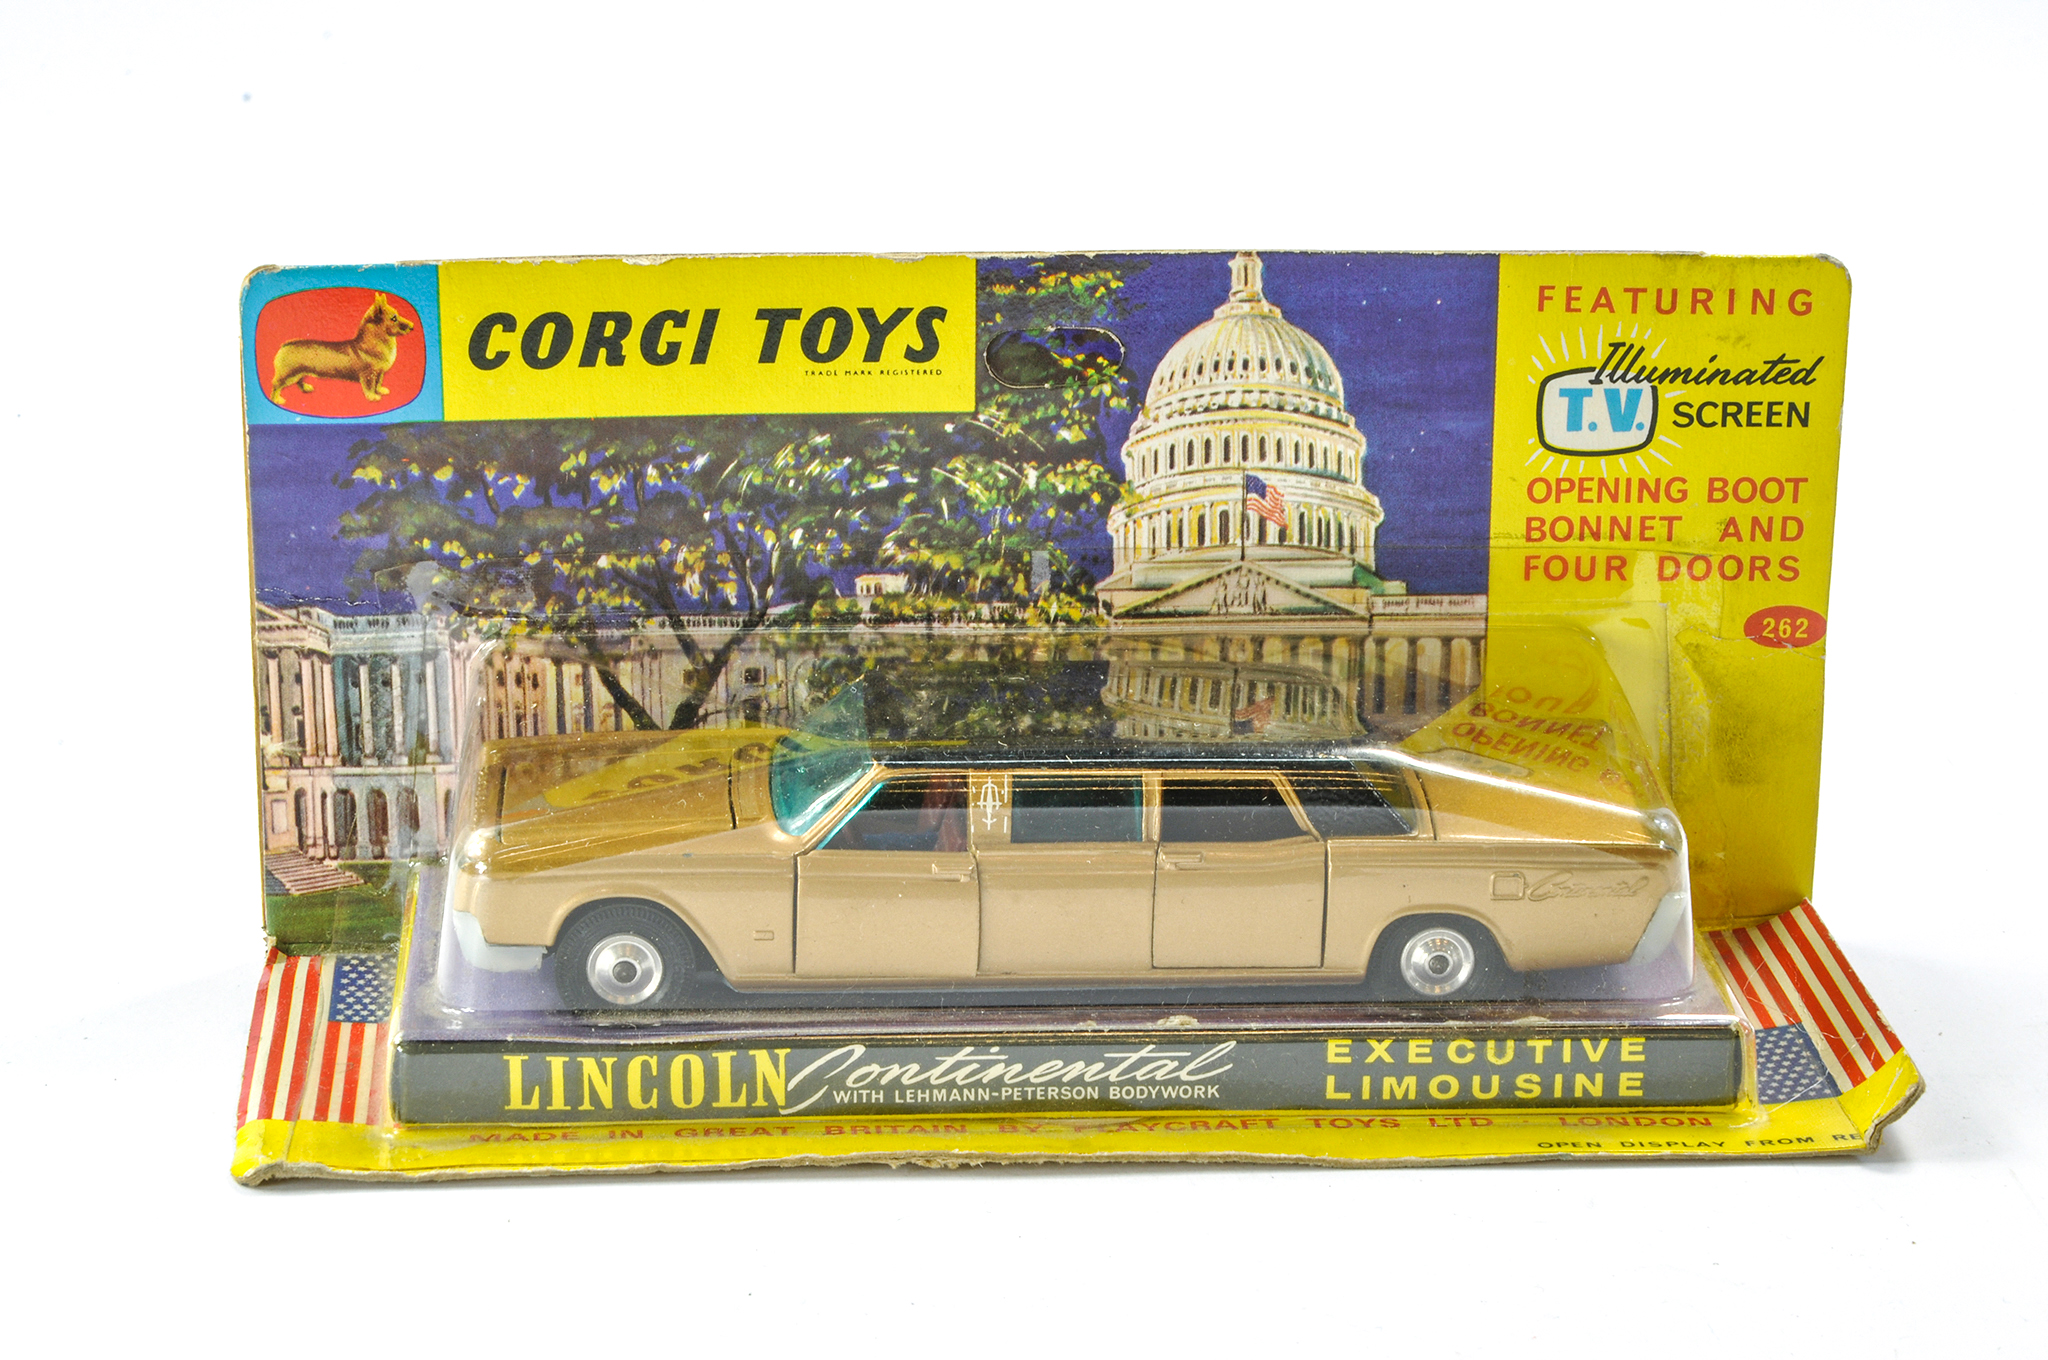 Corgi No. 262 Lincoln Continental Exec Limousine. Generally very good, some wear to bumpers and